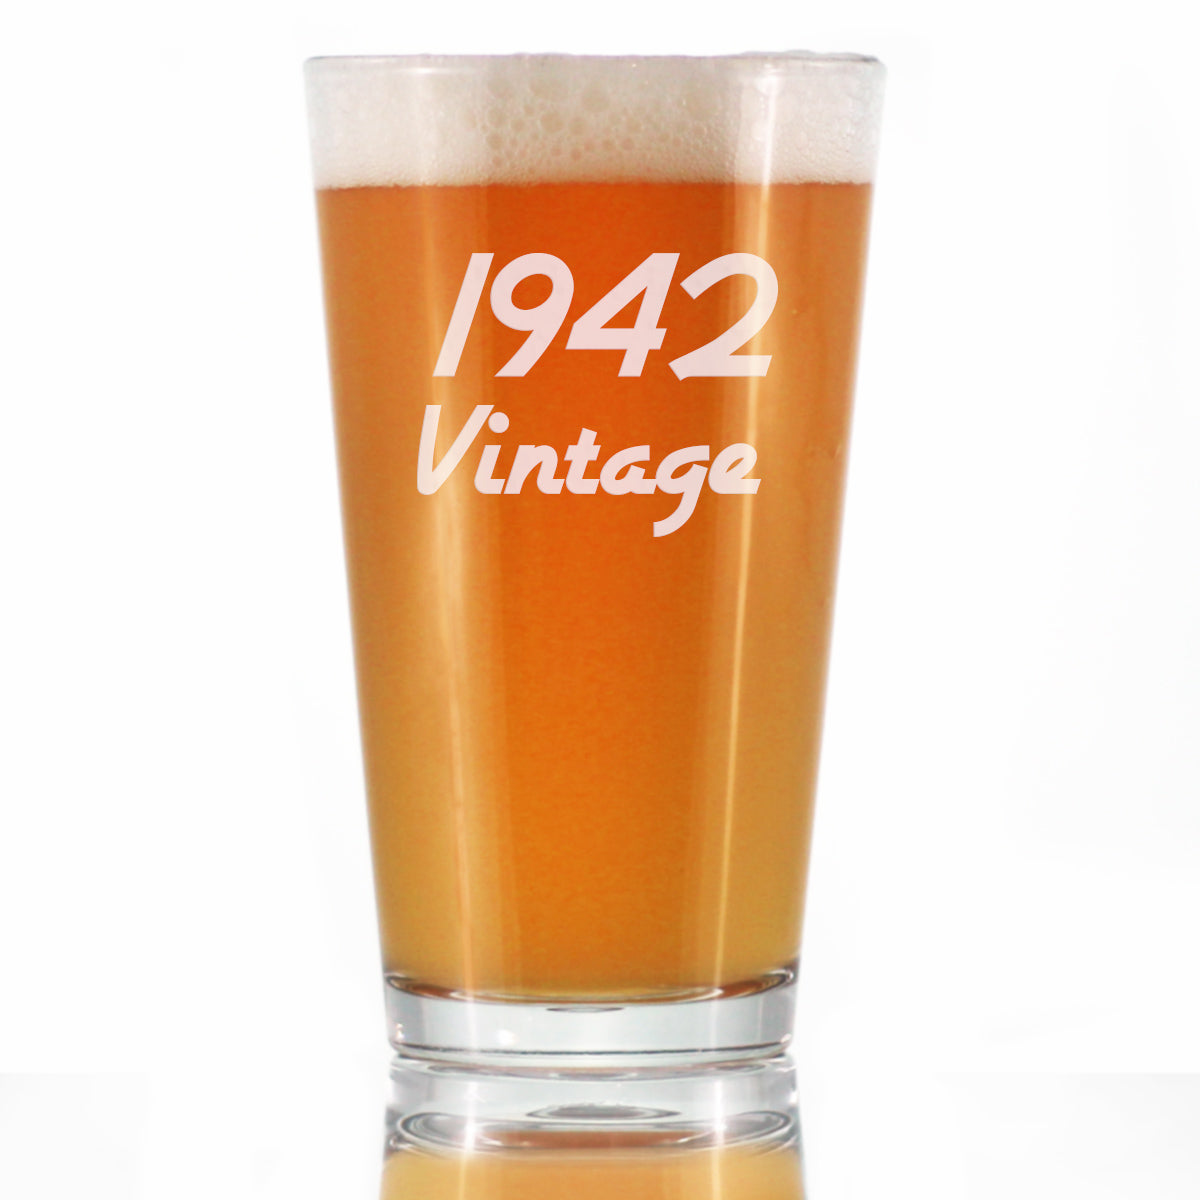 Vintage 1942 - Pint Glass for Beer - 81st Birthday Gifts for Men or Women Turning 81 - Fun Bday Party Decor - 16 oz